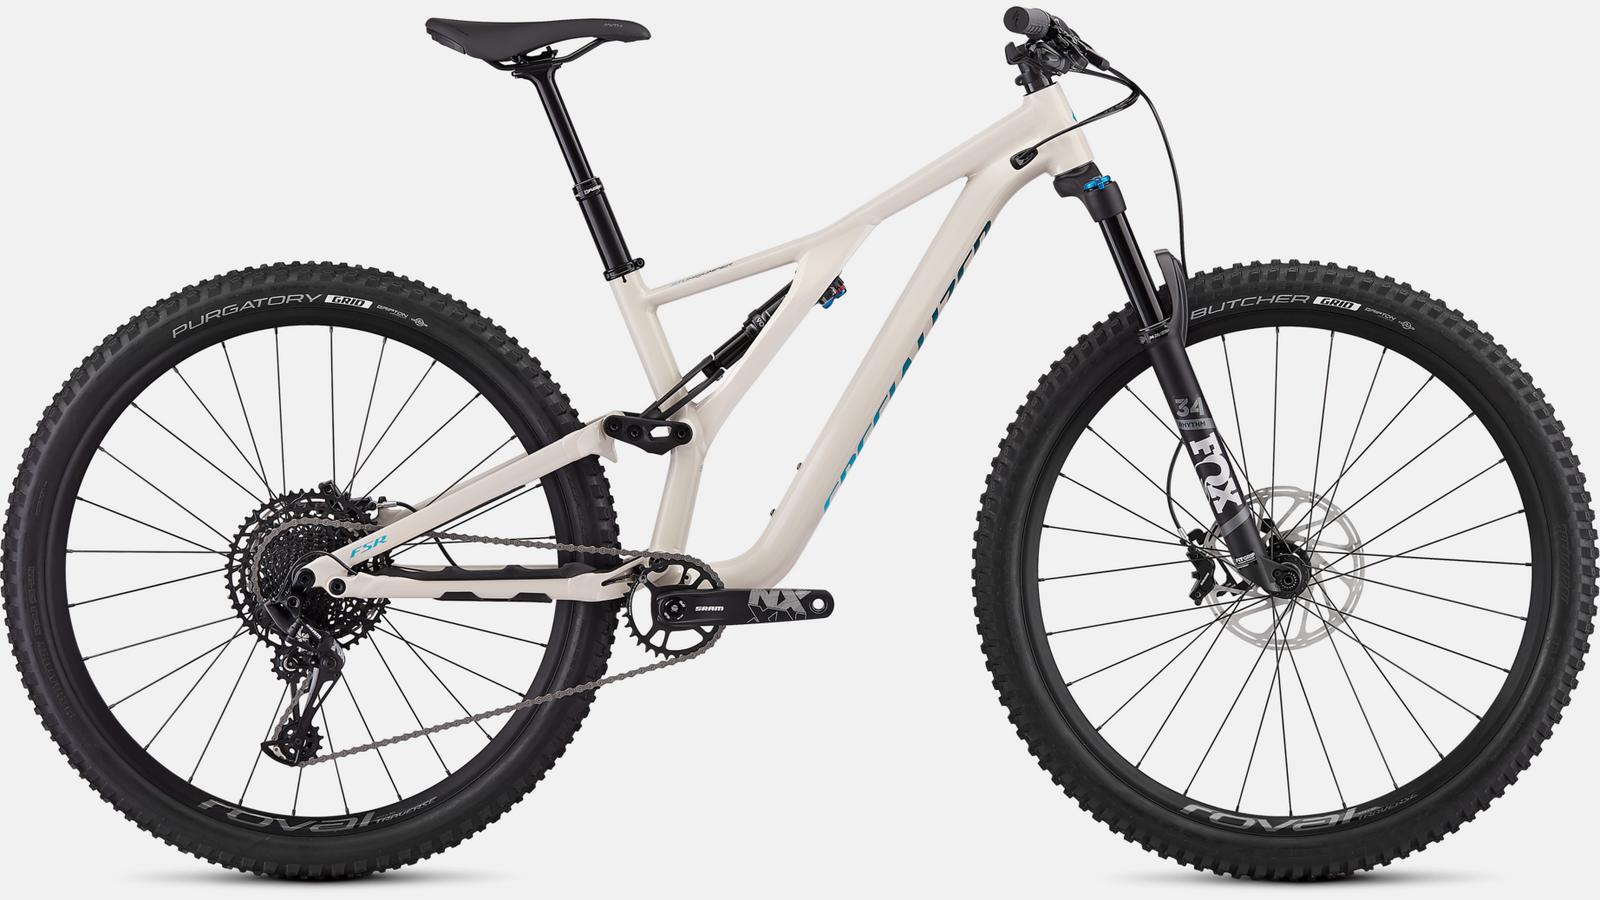 Paint for 2019 Specialized Women's Stumpjumper ST Comp Alloy 29 12-speed - Gloss White Mountains